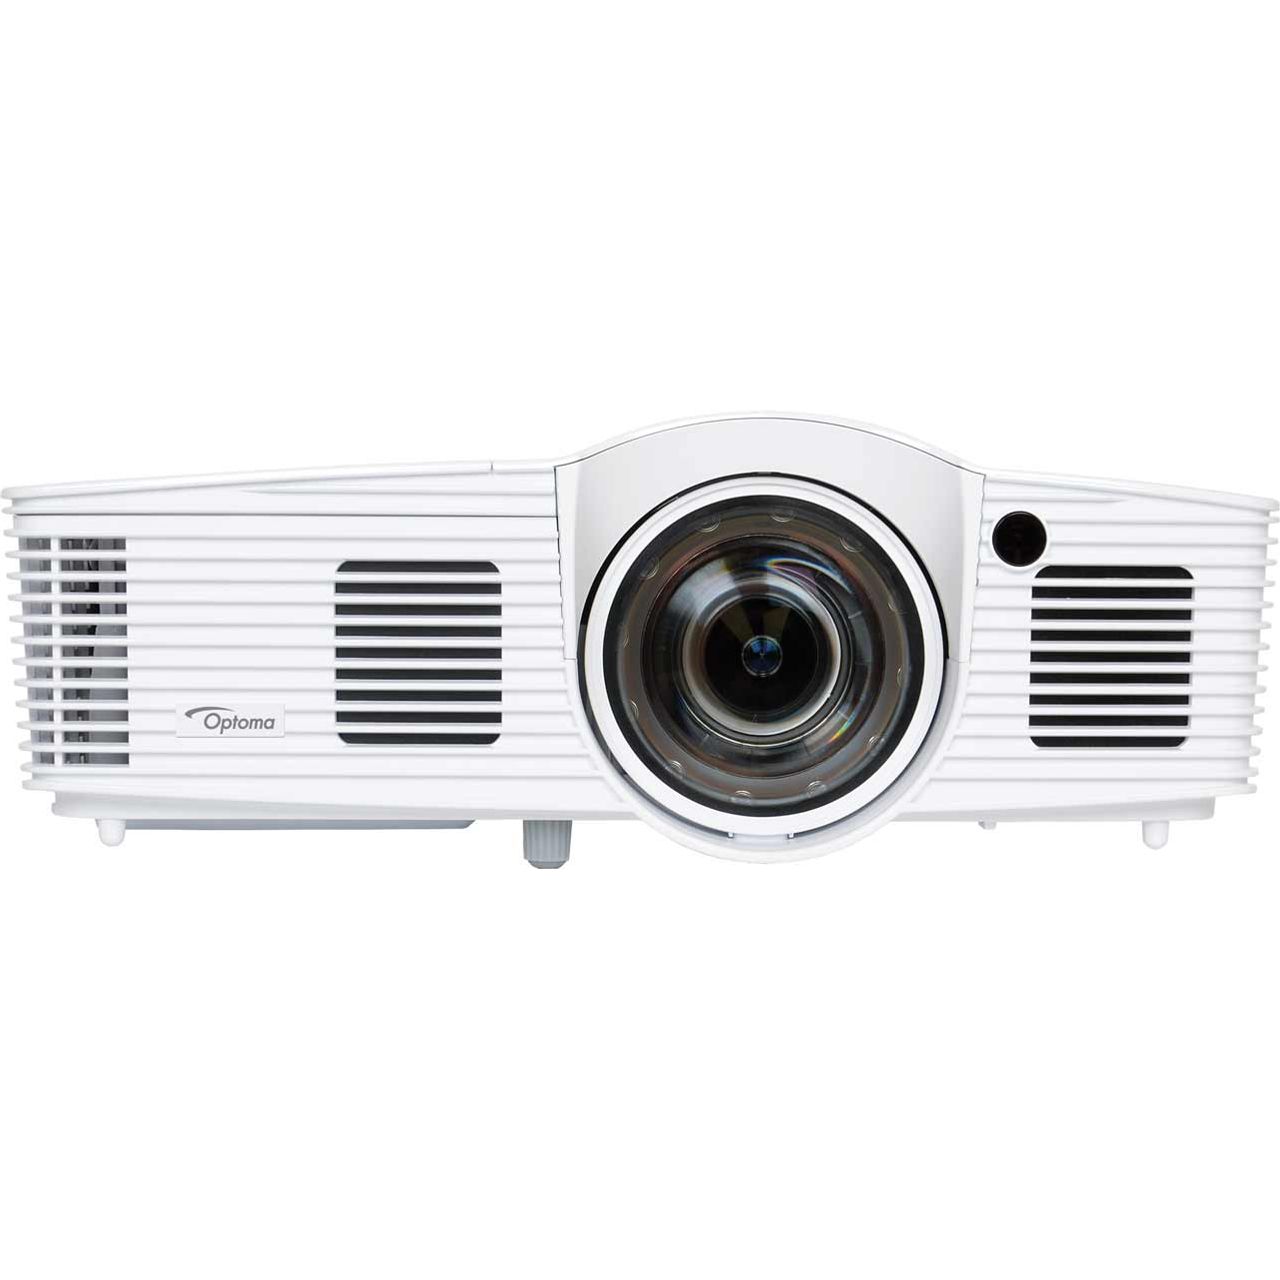 Optoma GT1080e Projector 1080p Full HD Review